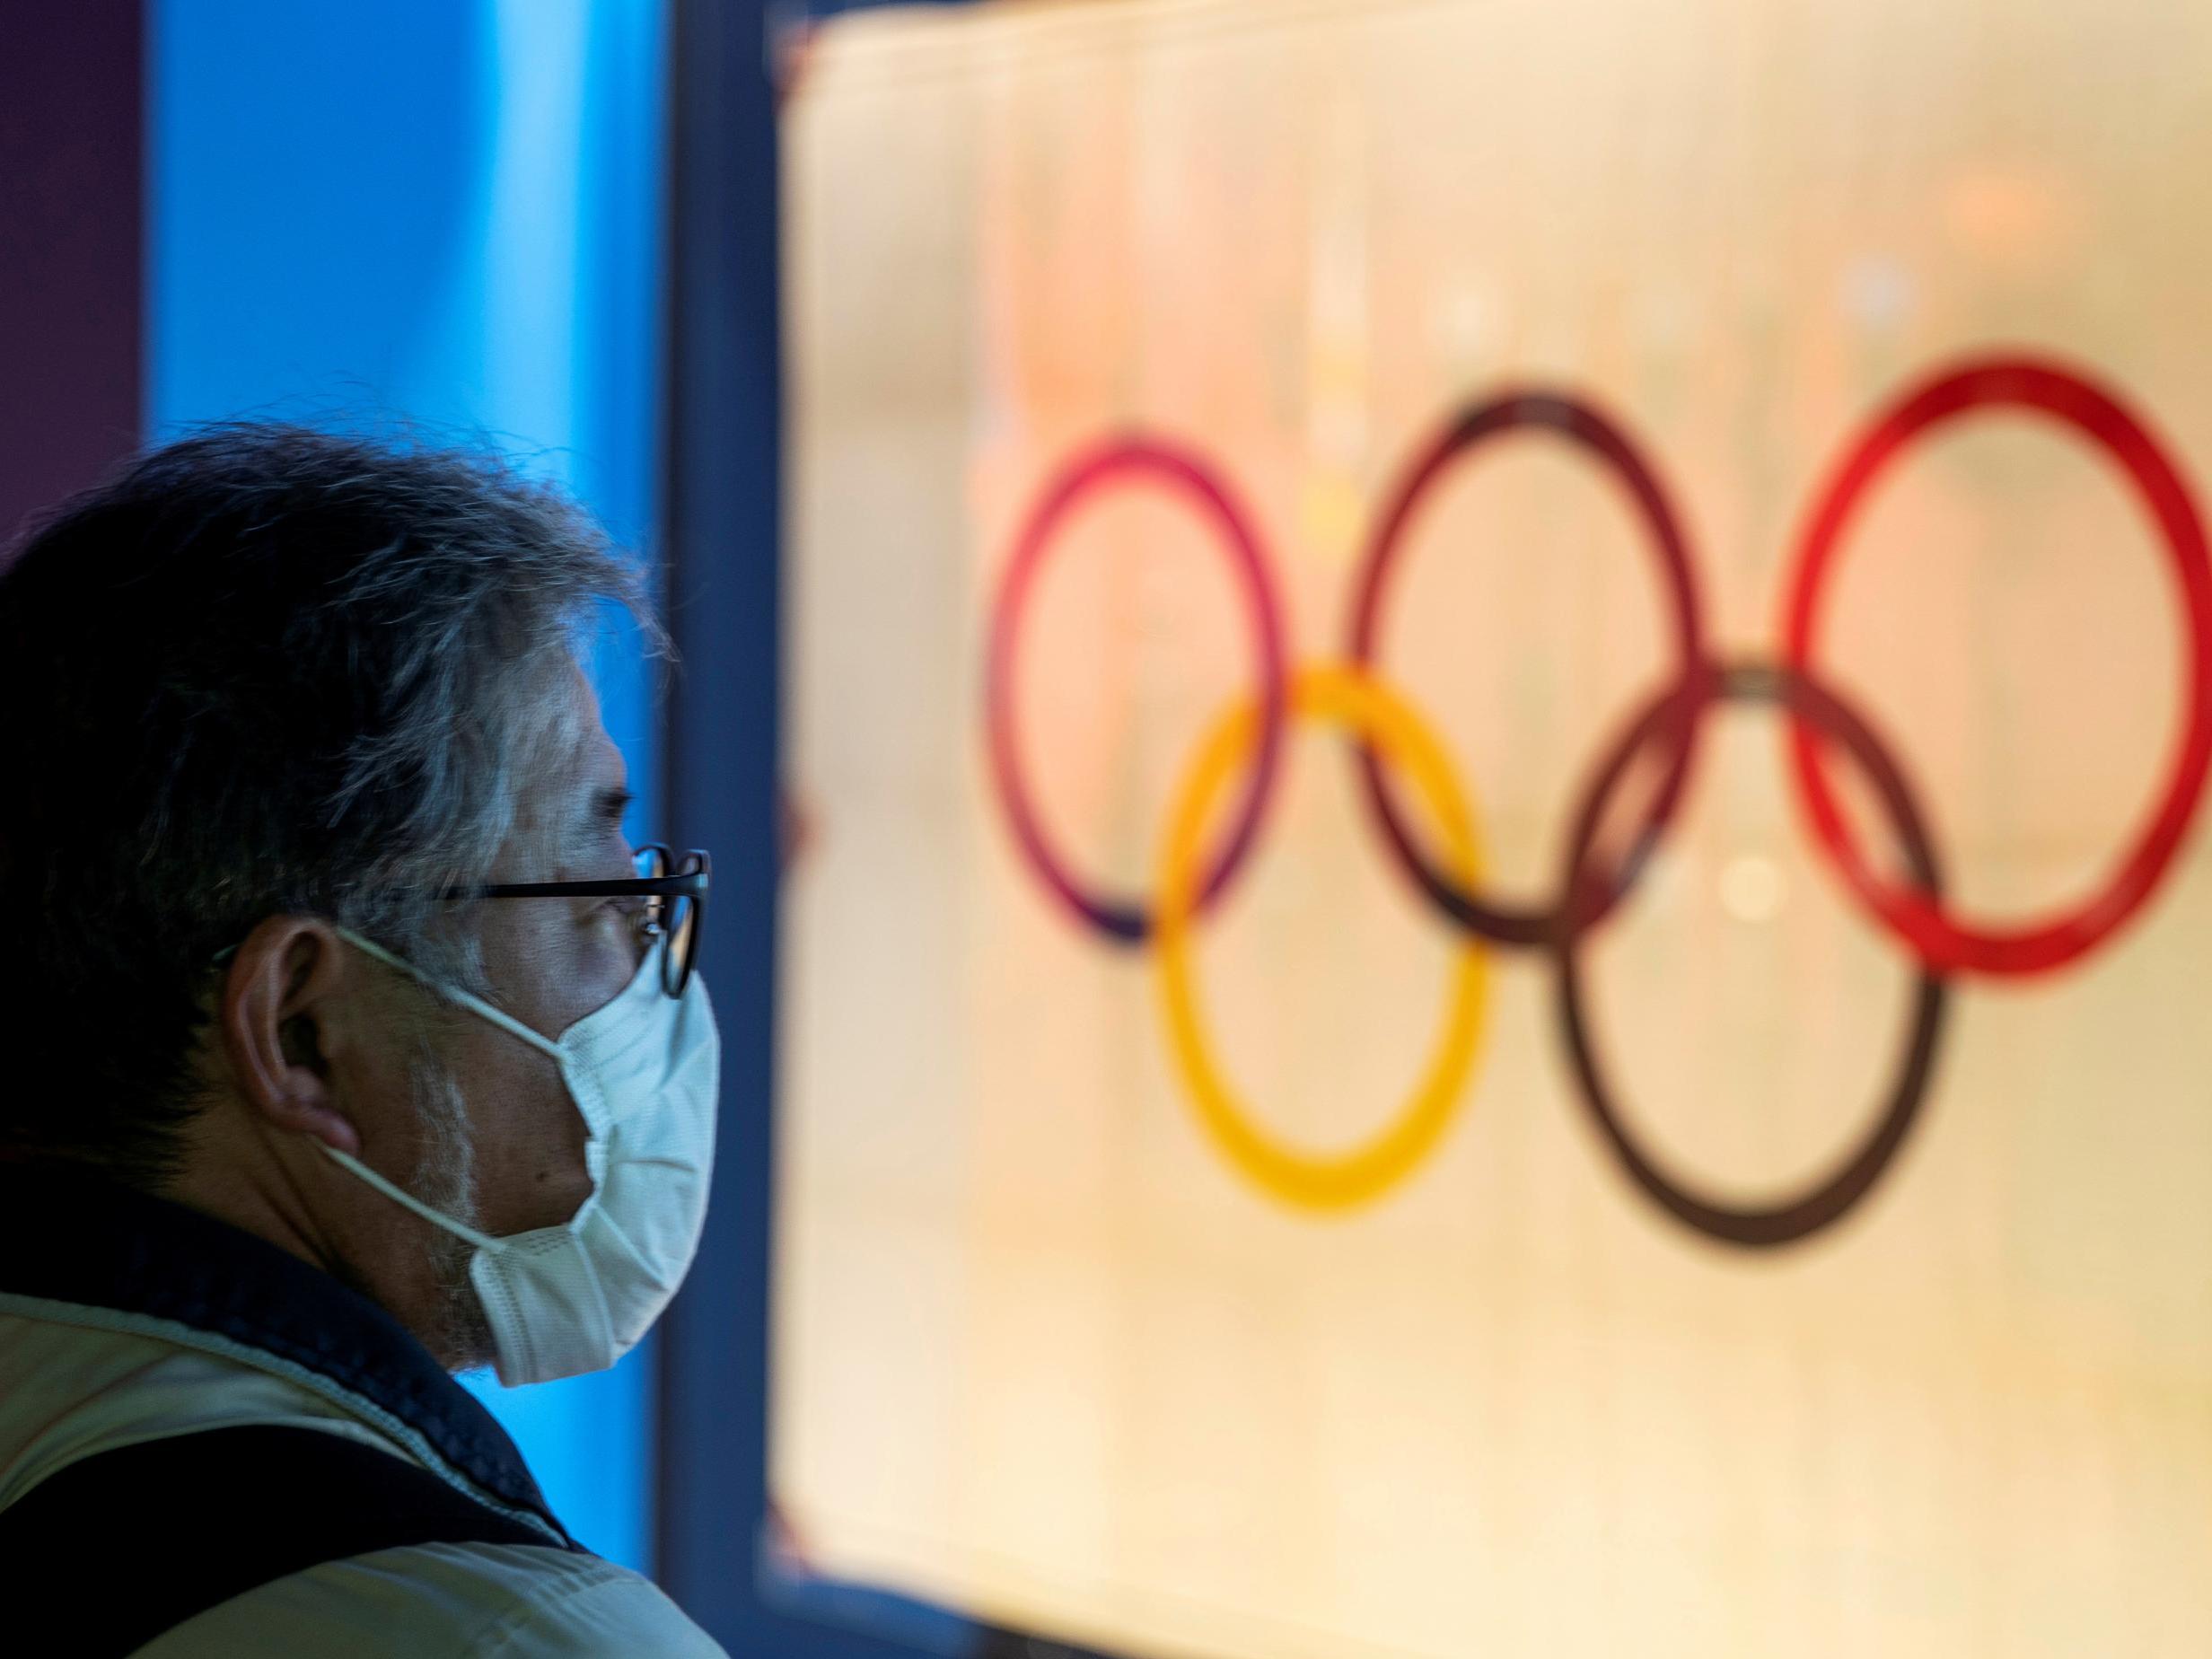 The Tokyo Olympics are, once again, under threat